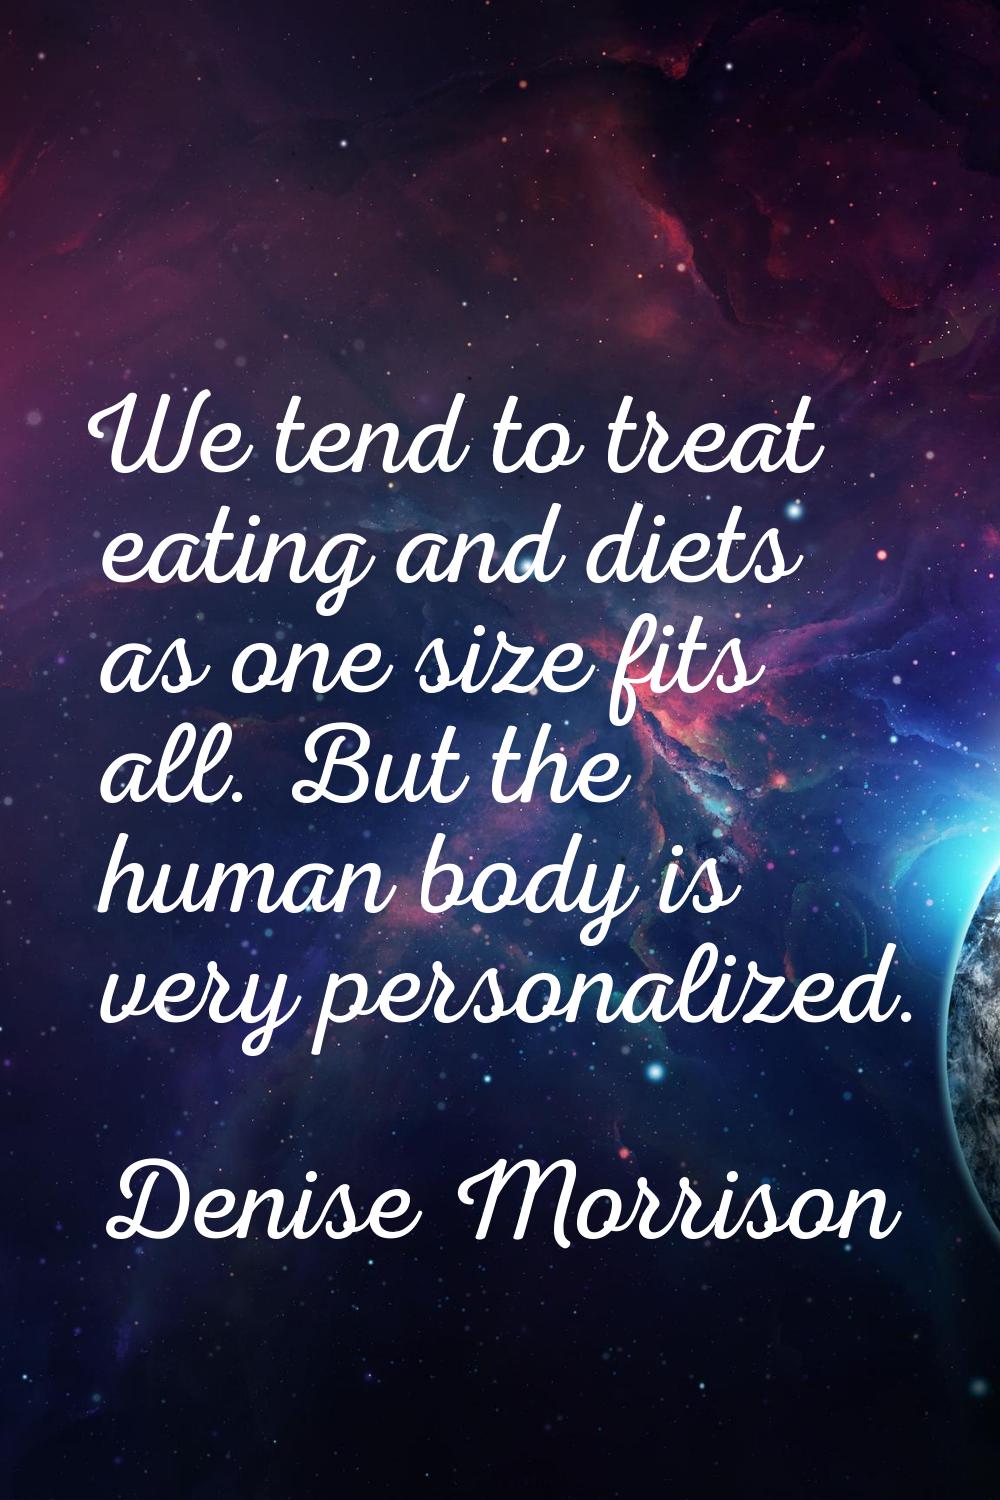 We tend to treat eating and diets as one size fits all. But the human body is very personalized.